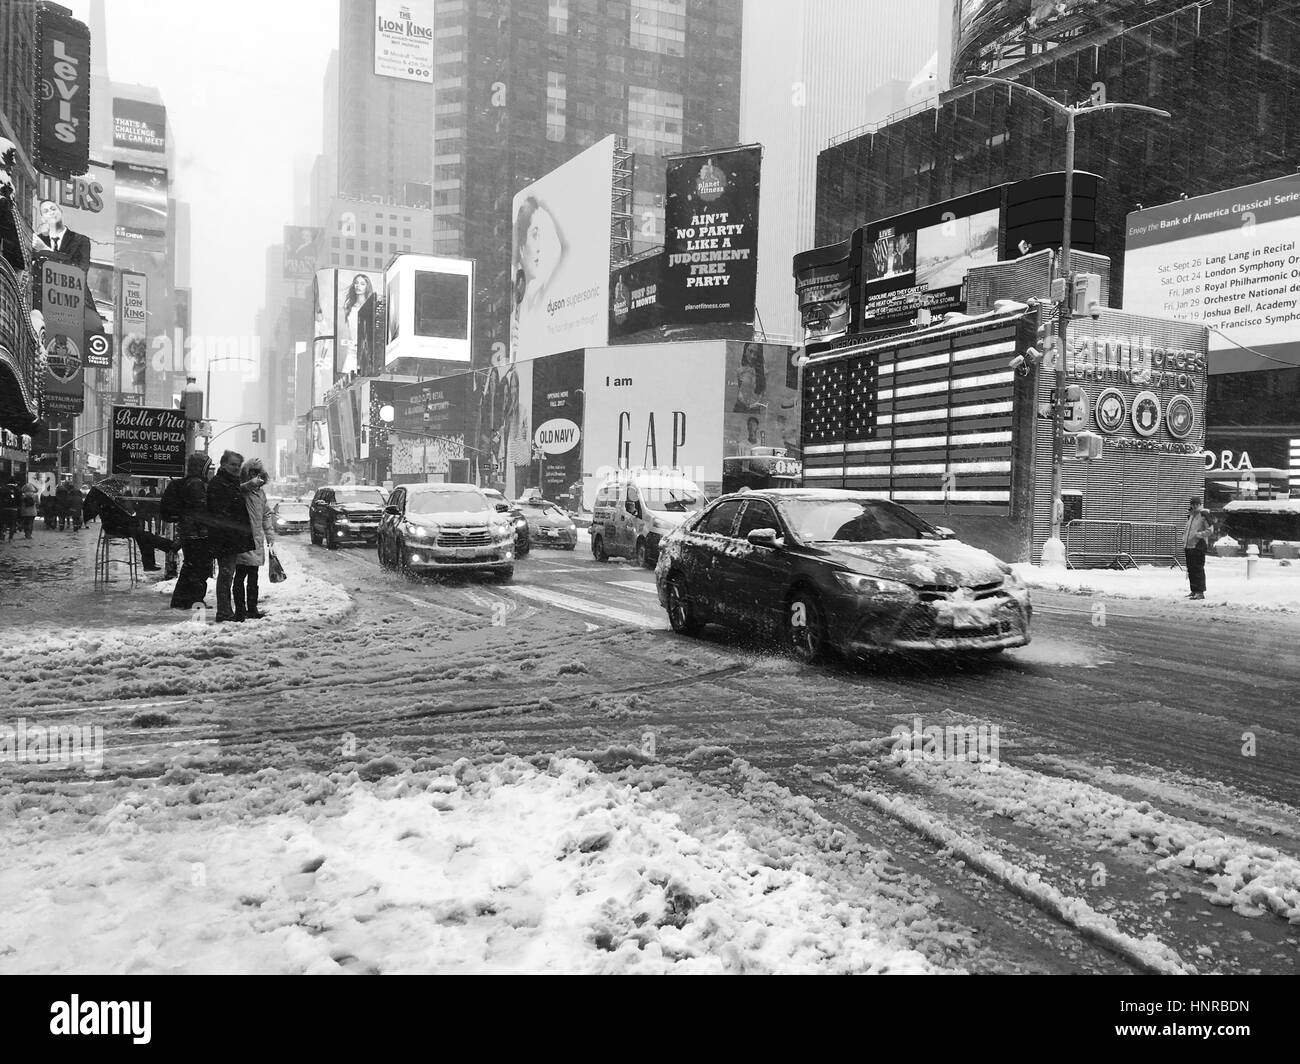 Snow storm united states Black and White Stock Photos & Images - Alamy